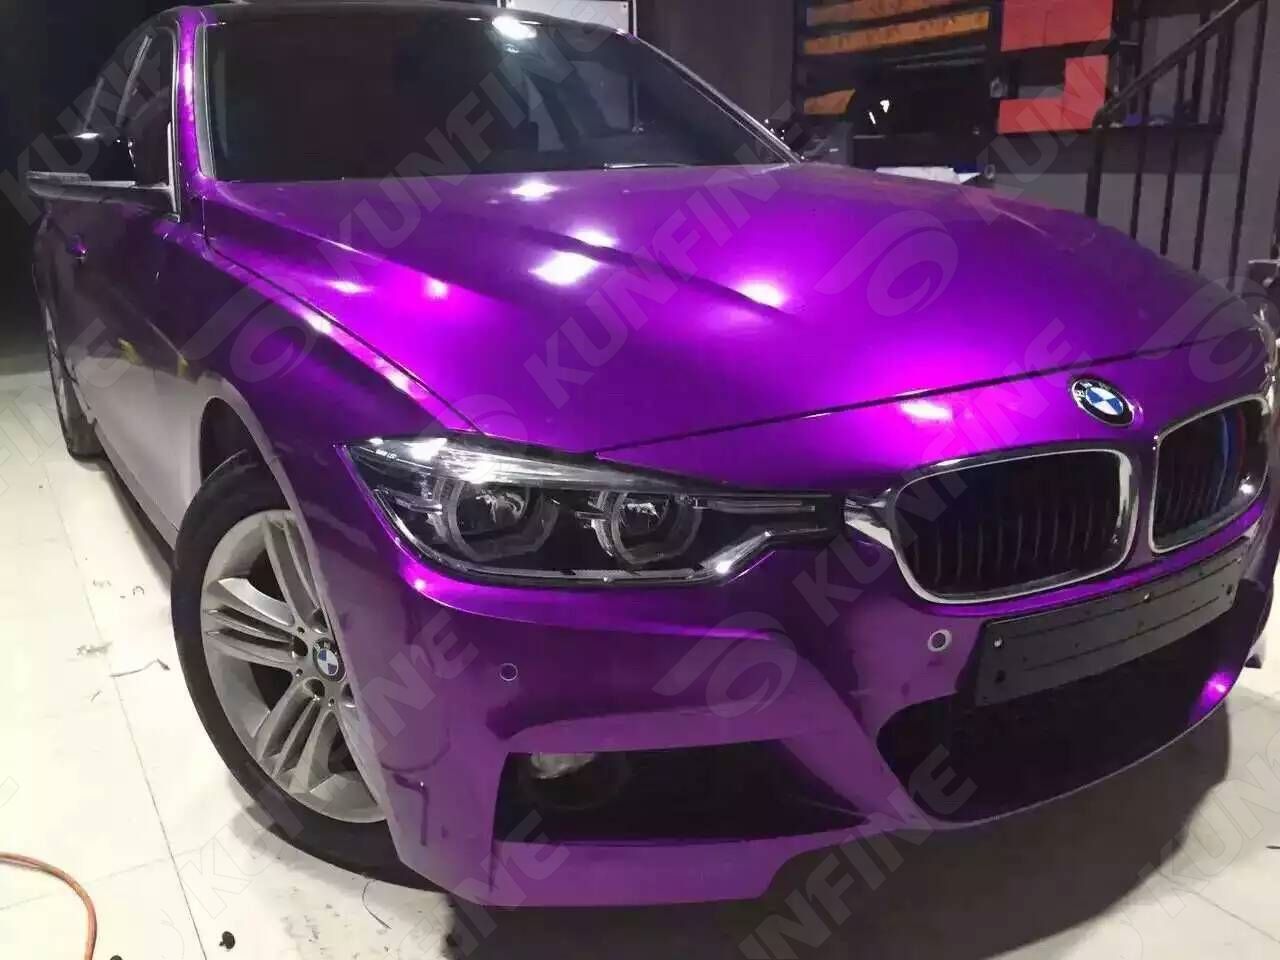 2019 Car Styling Wrap Aurora Purple Car Vinyl Film Body Sticker Car Wrap With Air Free Bubble For Vehiche Motorcycle 1 52 20m Roll Kf F1047 From